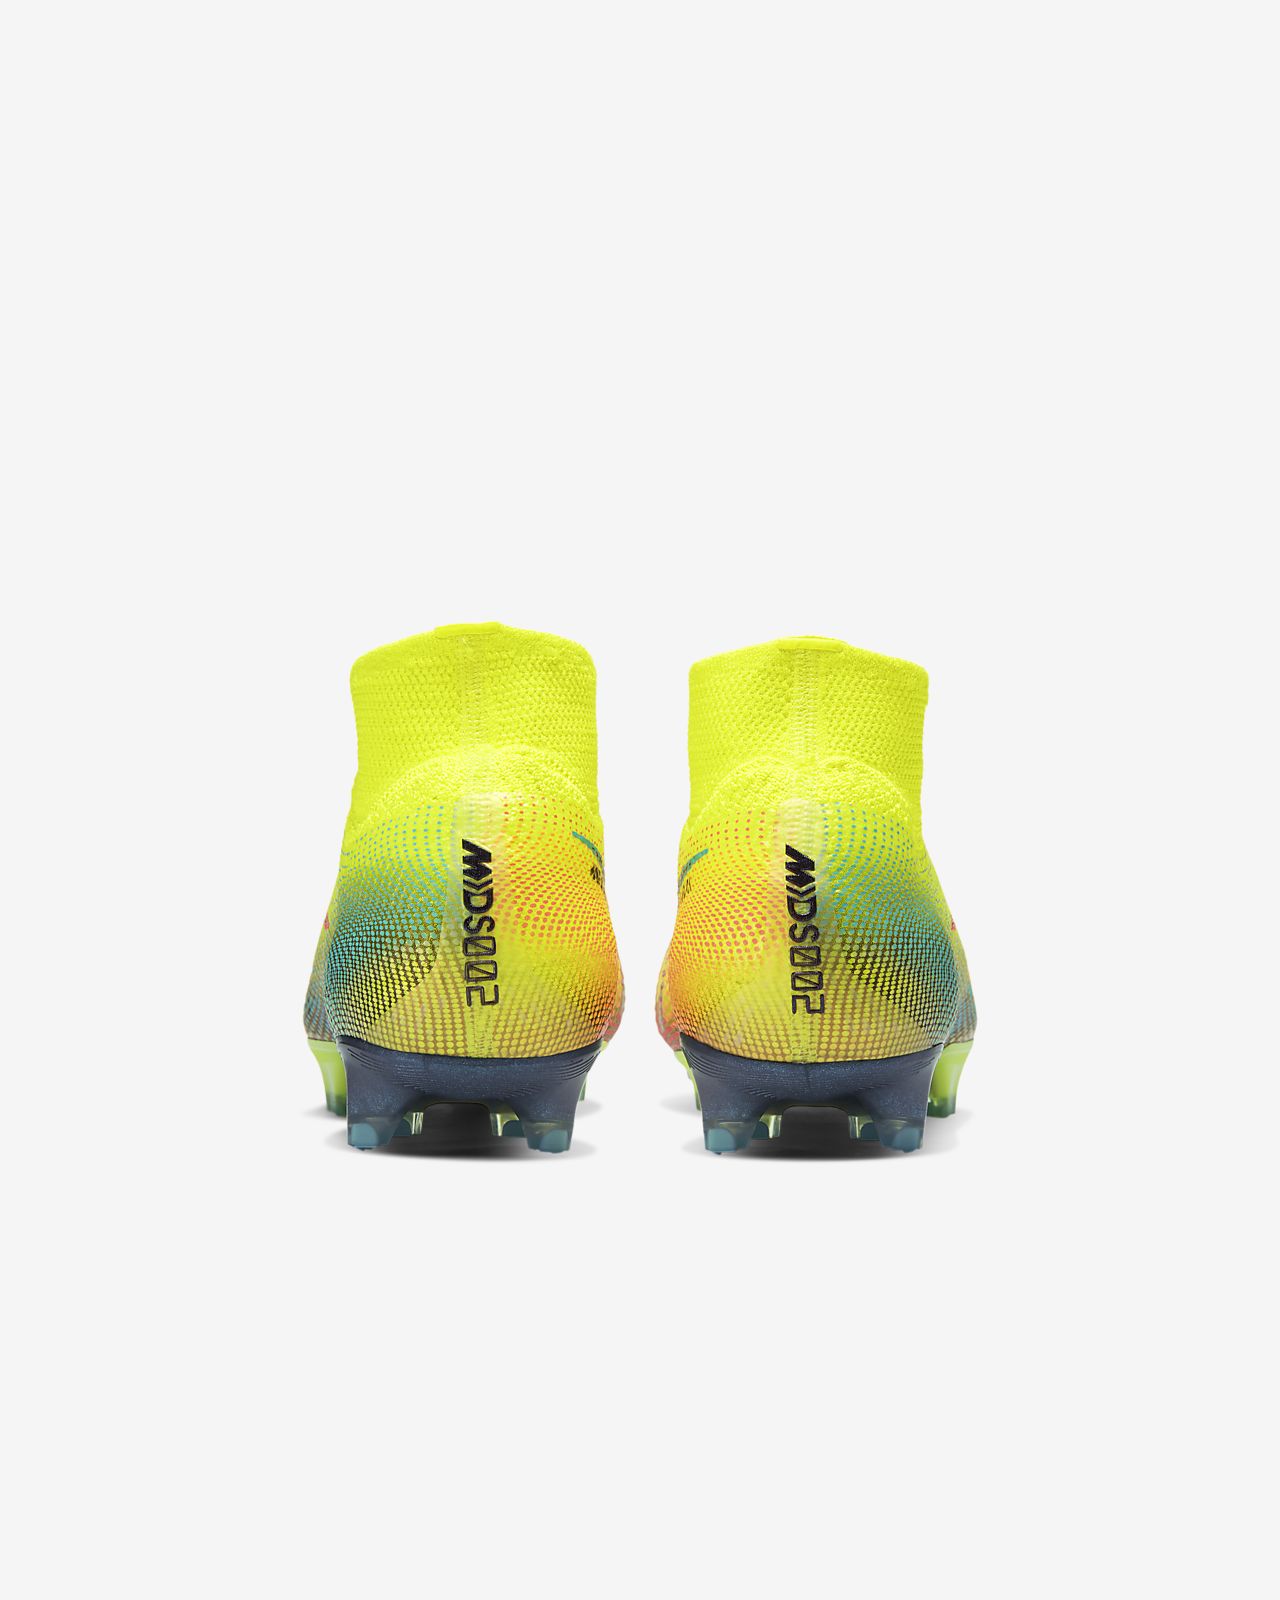 Nike Mercurial Superfly DreamDream Speed PD Extra Time